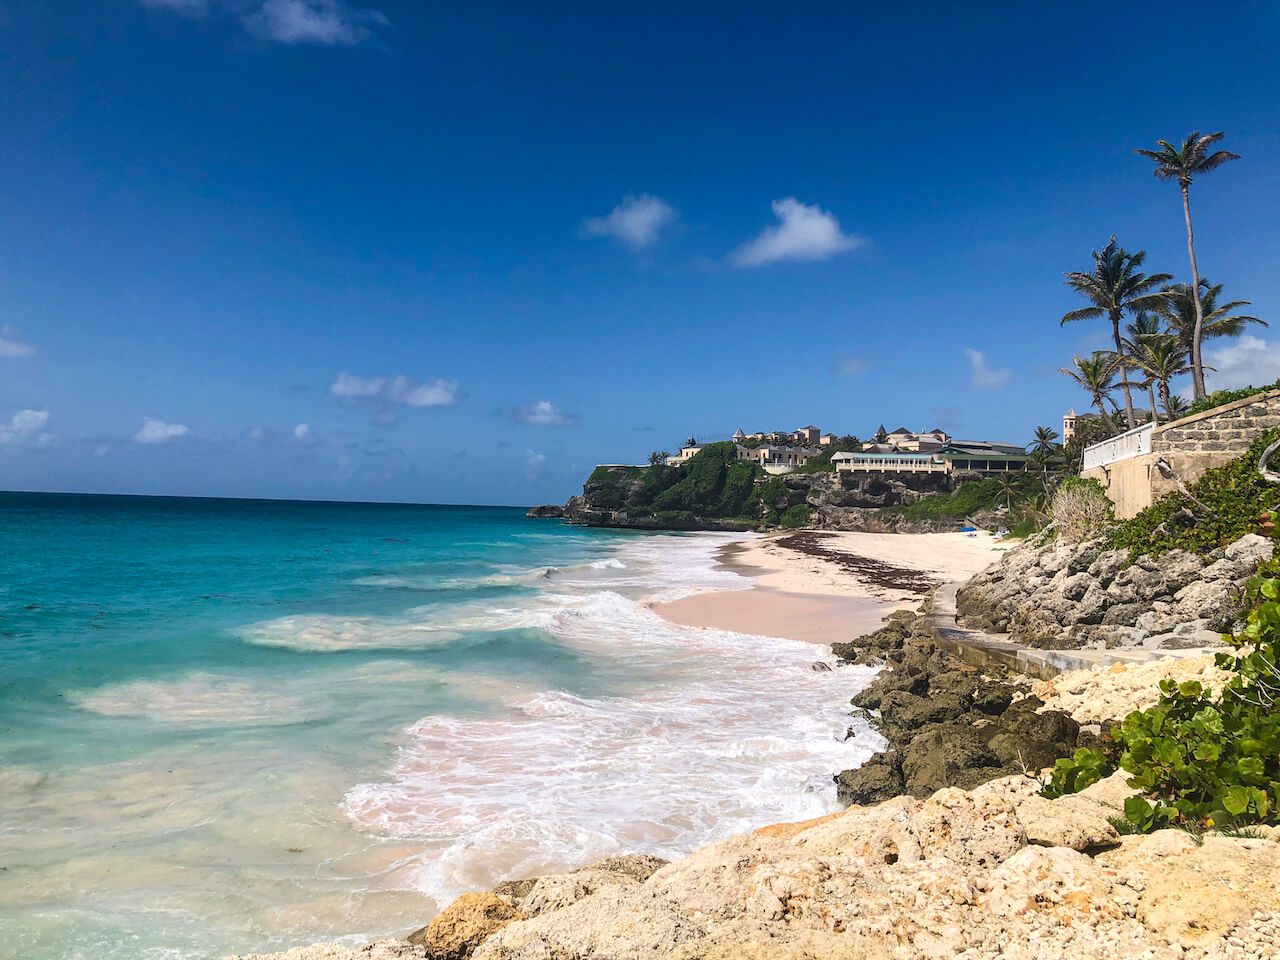 traveling to barbados during covid this is a view of the crane beach barbados a popular quarantine hotel